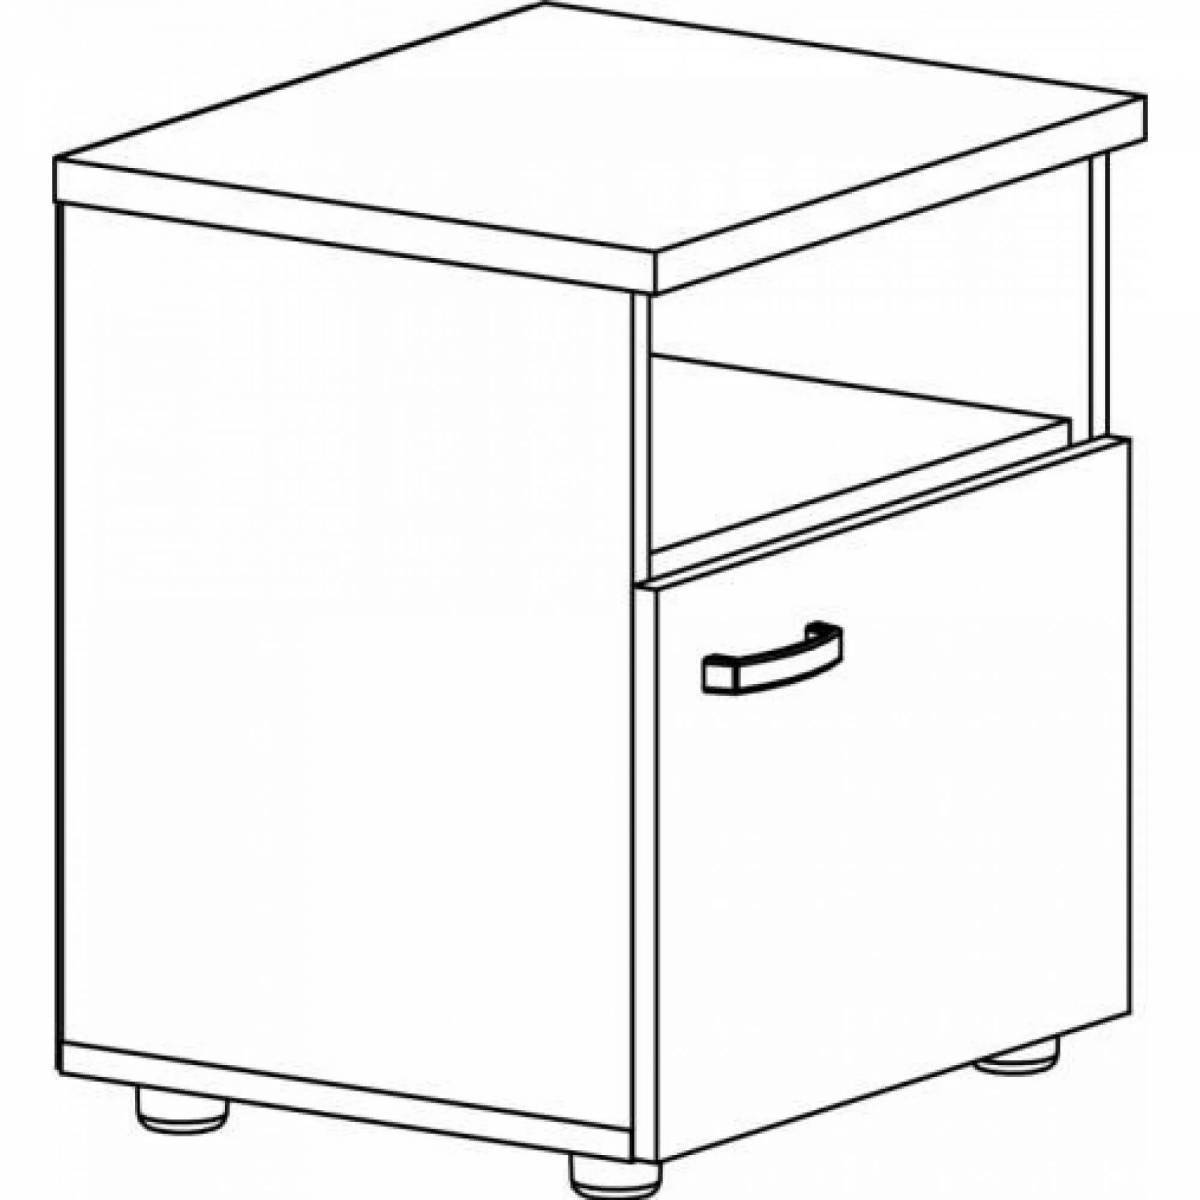 Adorable bedside table coloring page